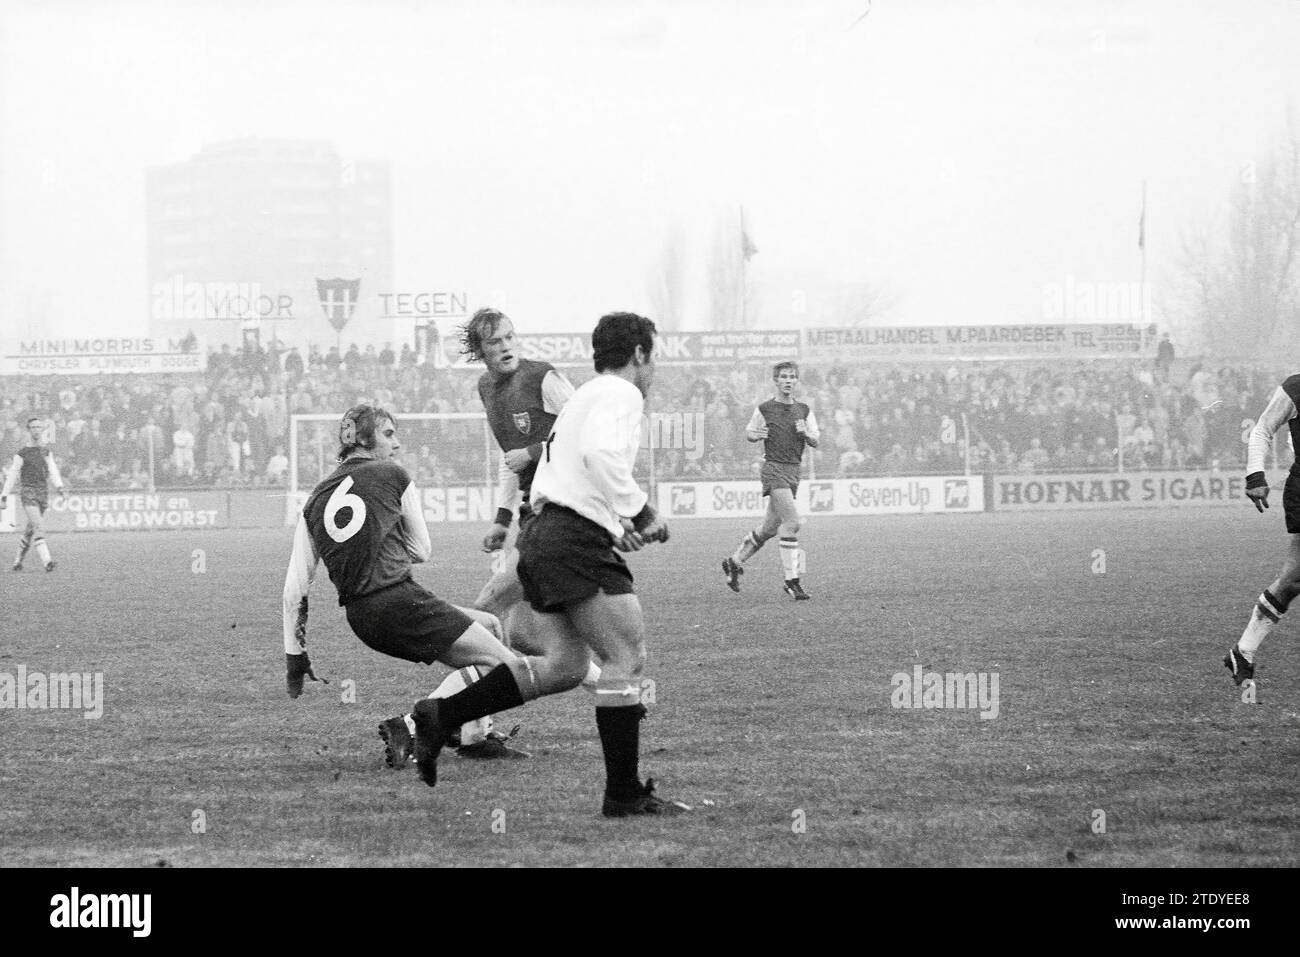 Haarlem - NAC, Football Haarlem, 22-11-1970, Whizgle News from the Past, Tailored for the Future. Explore historical narratives, Dutch The Netherlands agency image with a modern perspective, bridging the gap between yesterday's events and tomorrow's insights. A timeless journey shaping the stories that shape our future. Stock Photo